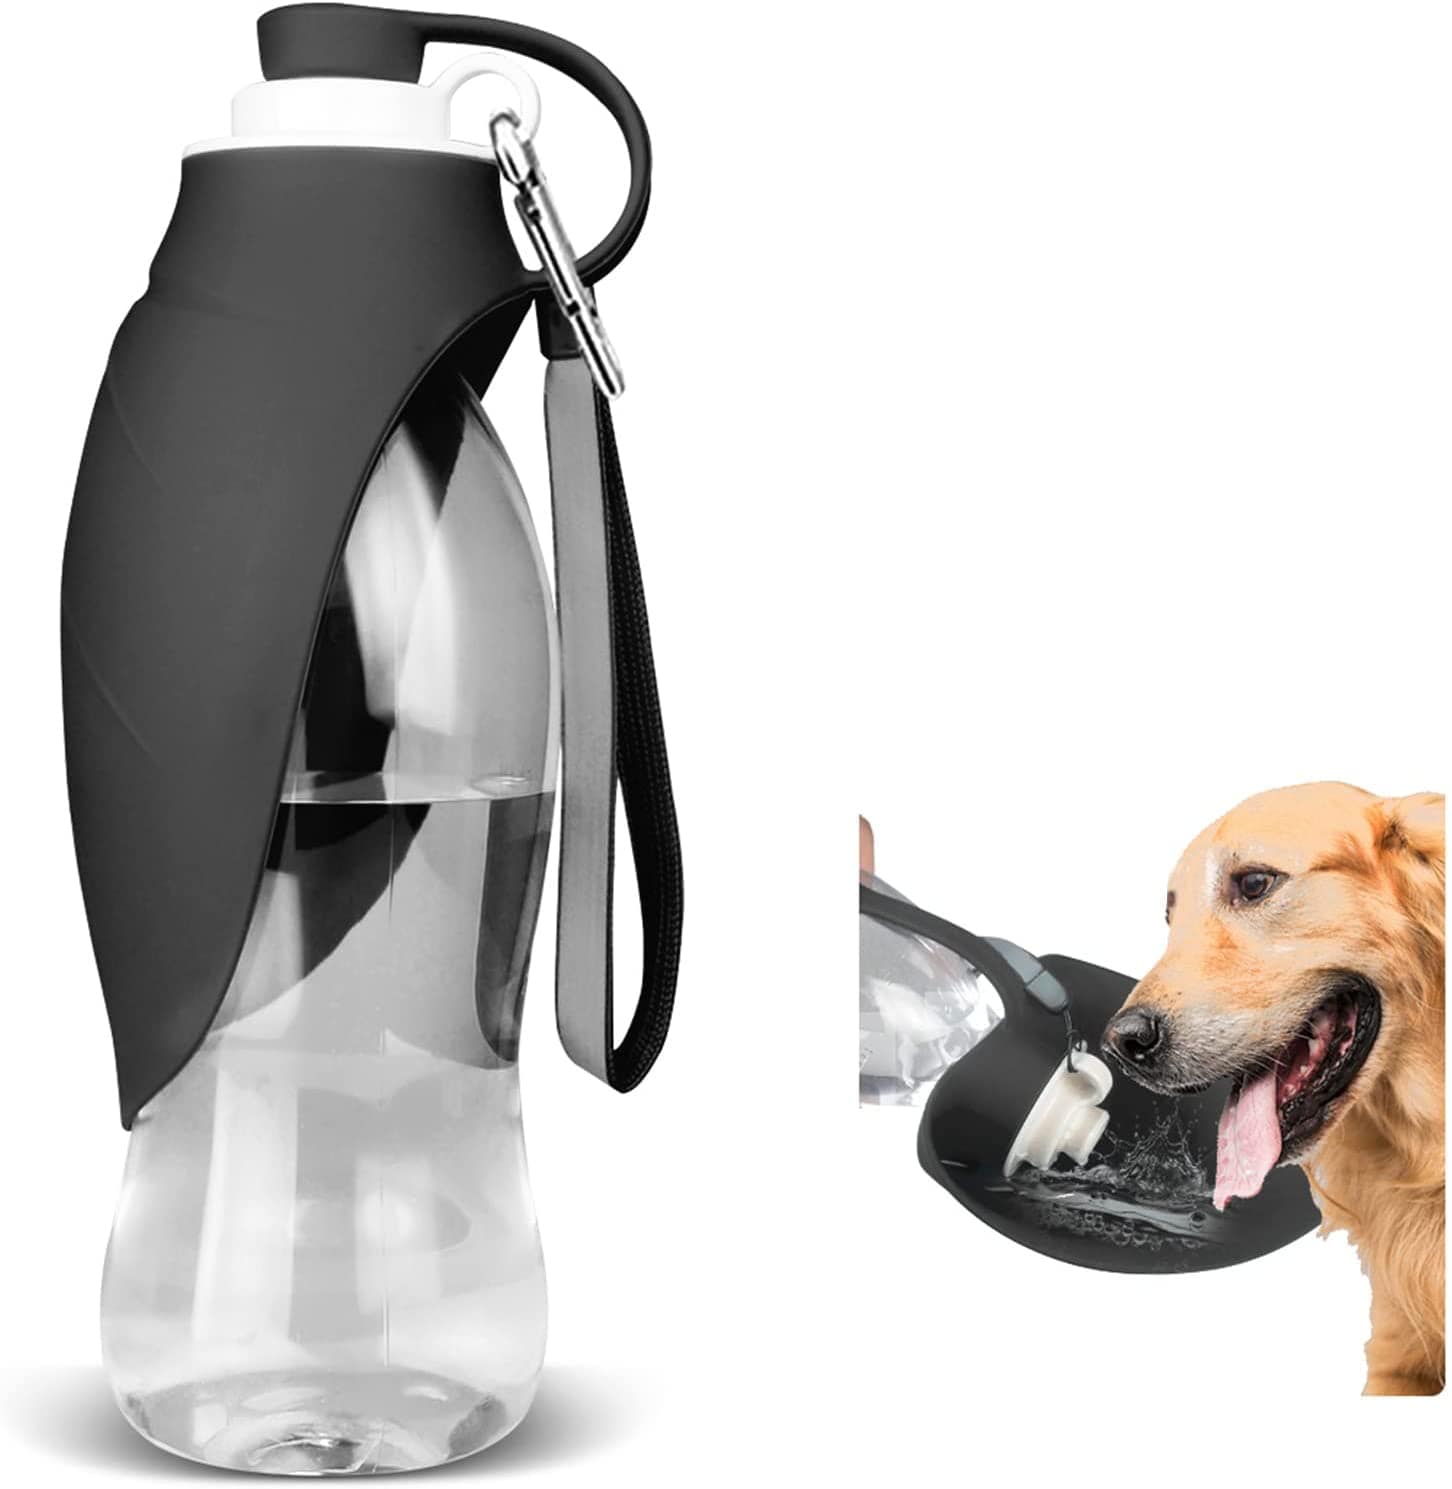 KUTKUT Dog Water Bottle for Outdoor Walking | Pet Water Dispenser Feeder Container Portable with Drinking Cup Bowl Outdoor Hiking, Travel for Puppy, Dogs, Cats (Black, 580 ml)-feeding essentials-kutkutstyle